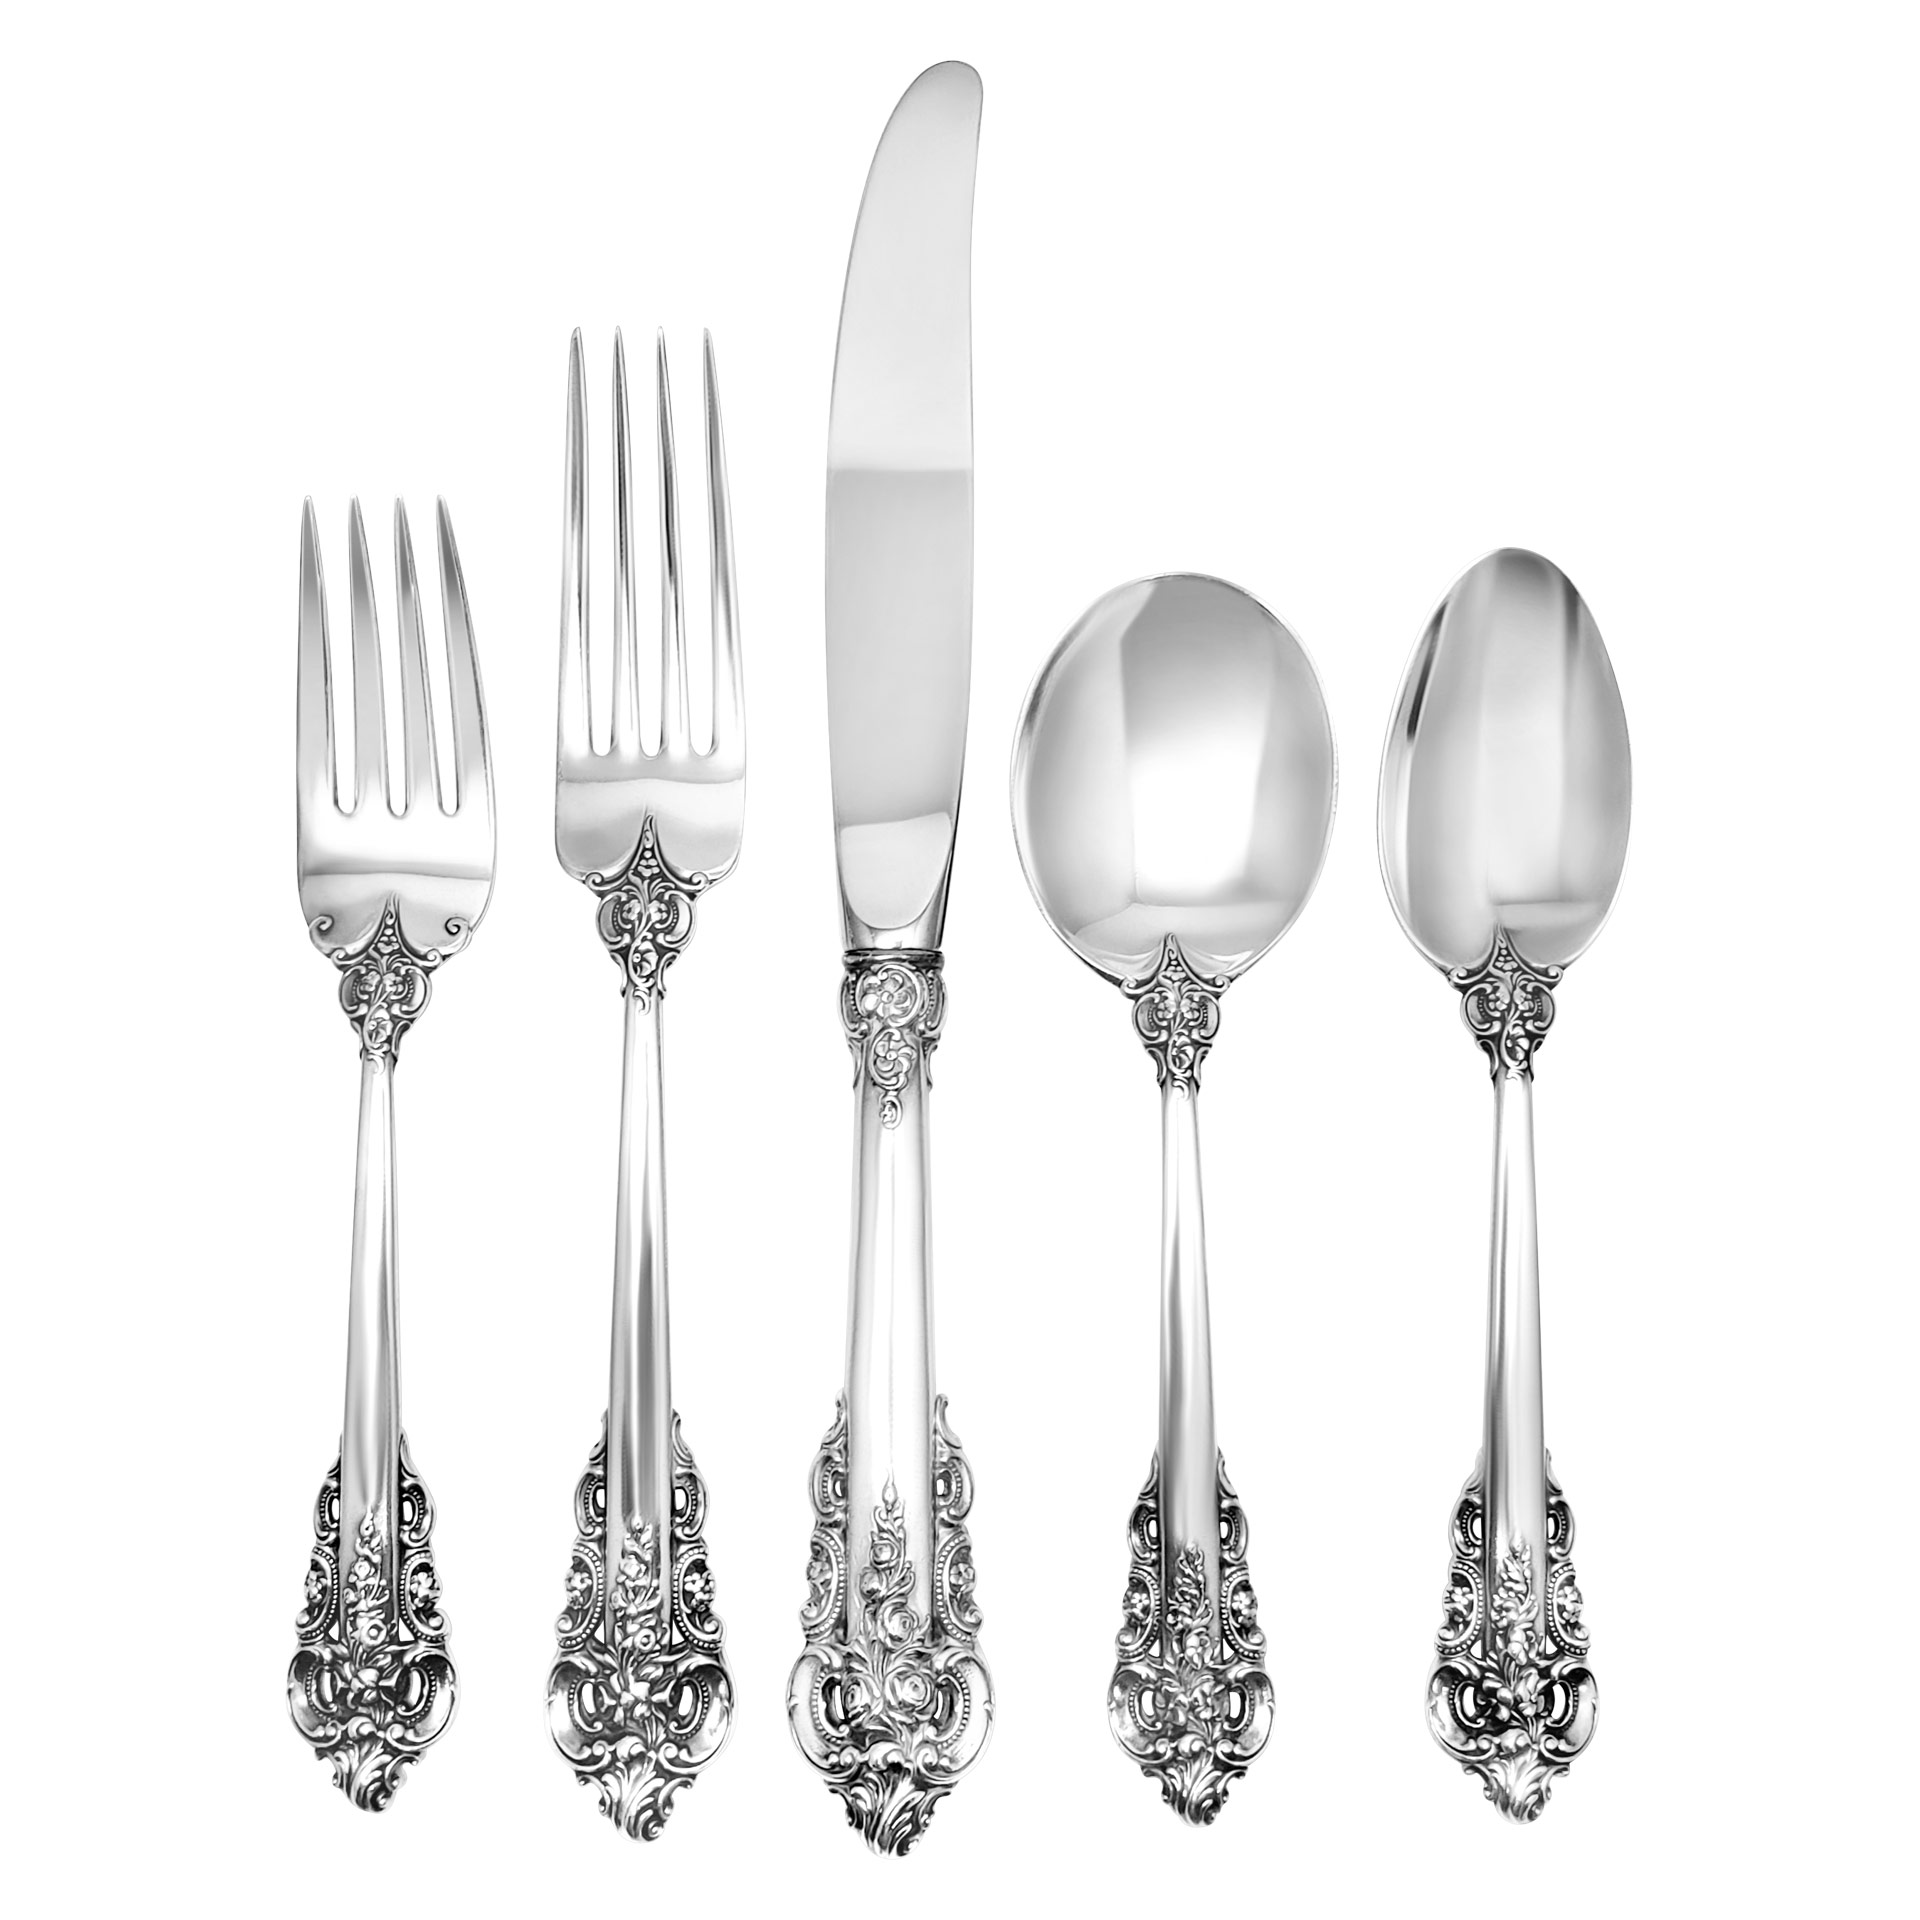 "GRANDE BAROQUE" sterling silver  flatware set patented in 1941 by Wallace. 5 place setting for 20- + 6 serving pieces. TOTAL: 115 pieces. image 1